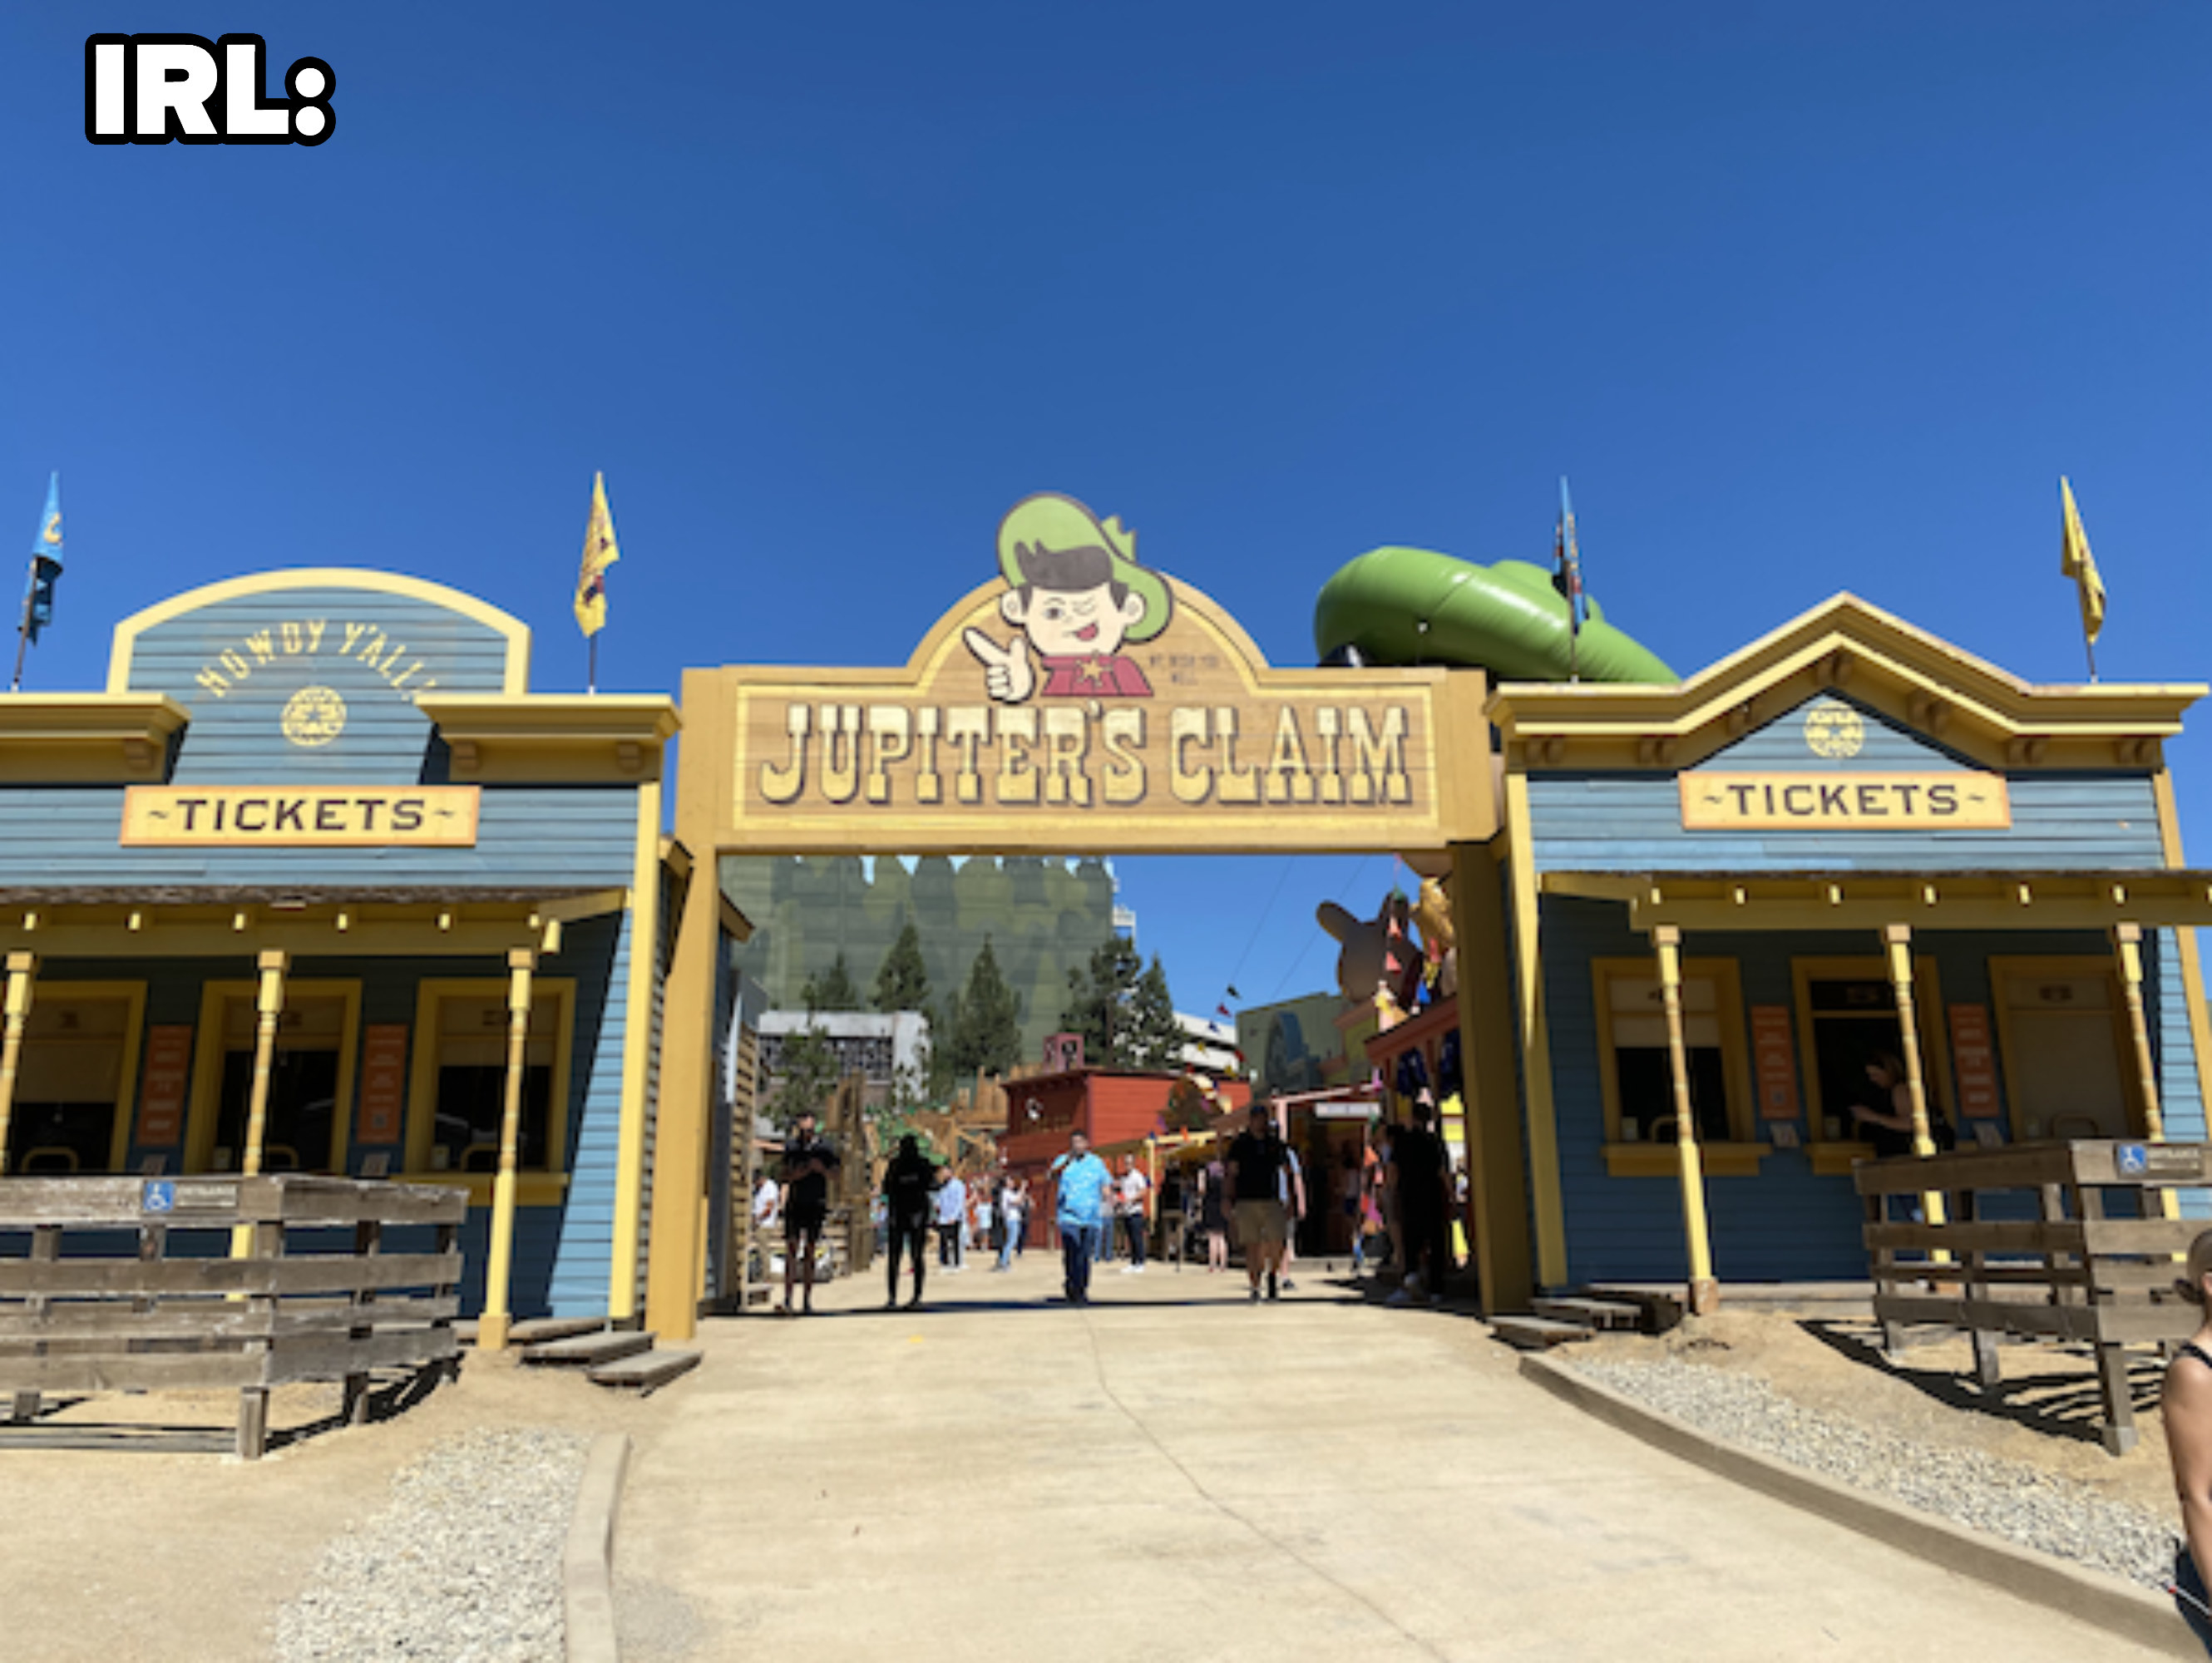 A photo of the set in real life, with the entrance looking very similar, including the same sign and giant inflatable mascot